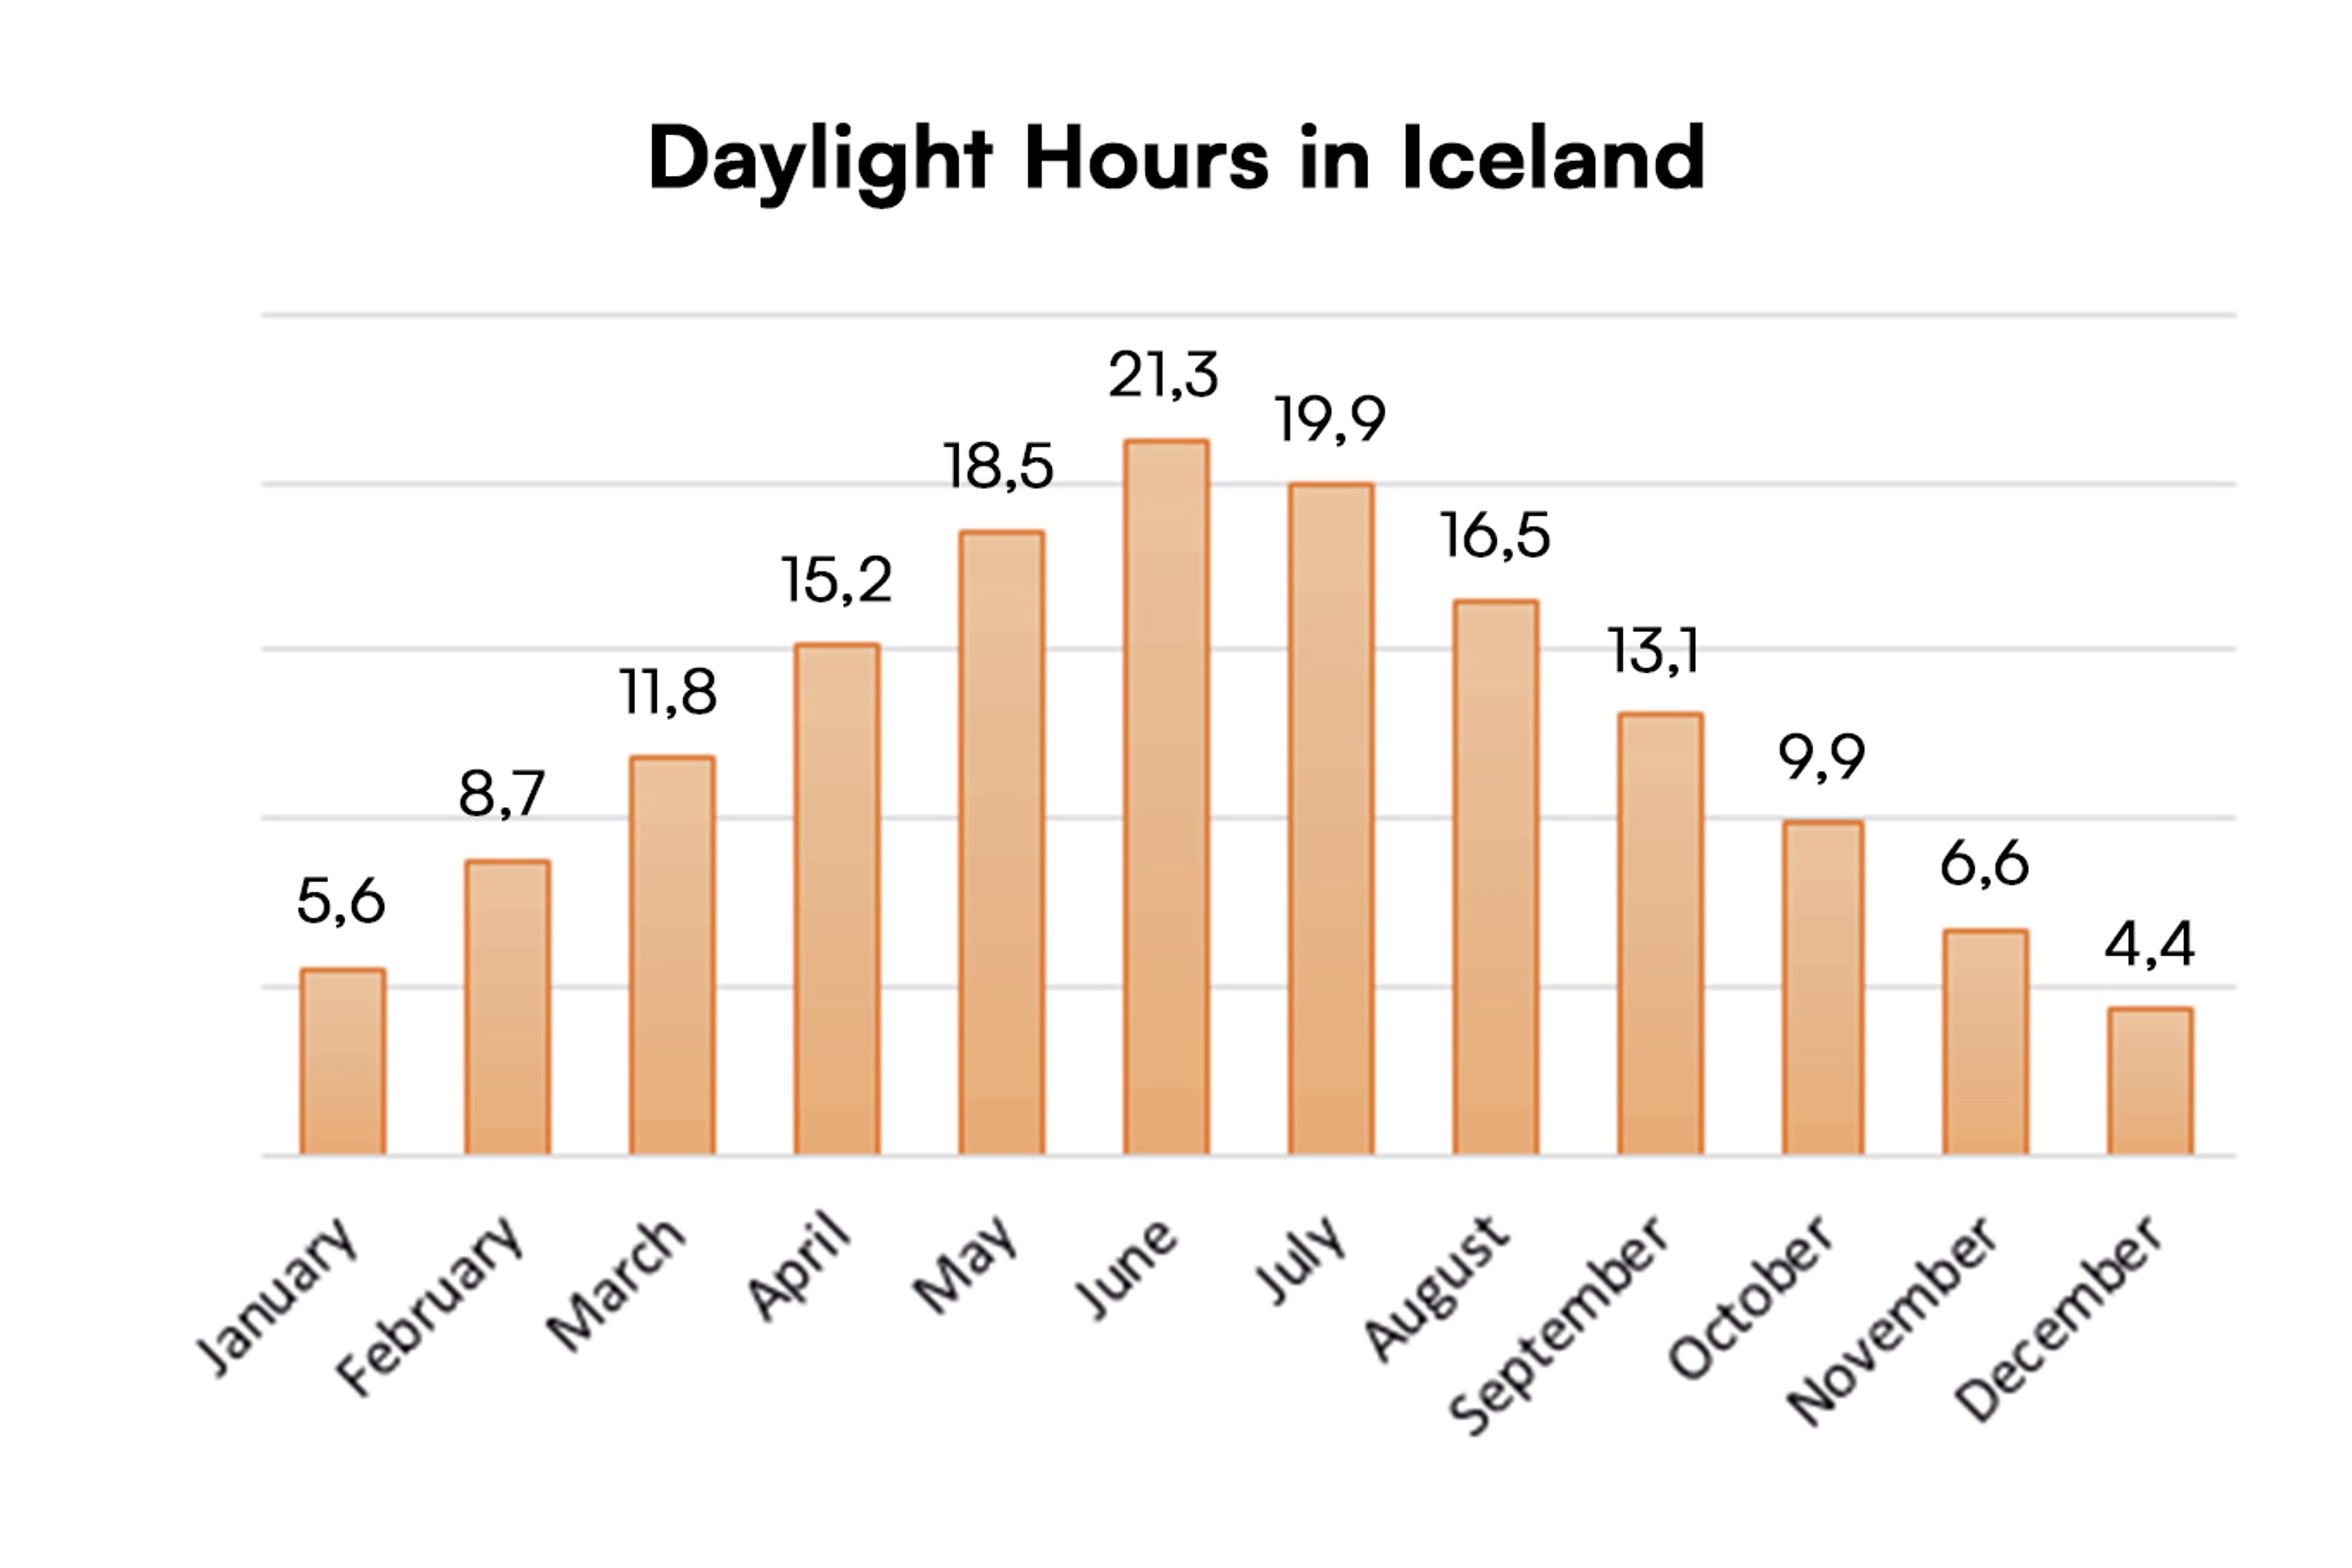 Daylight Hours an iceland experiences all year round